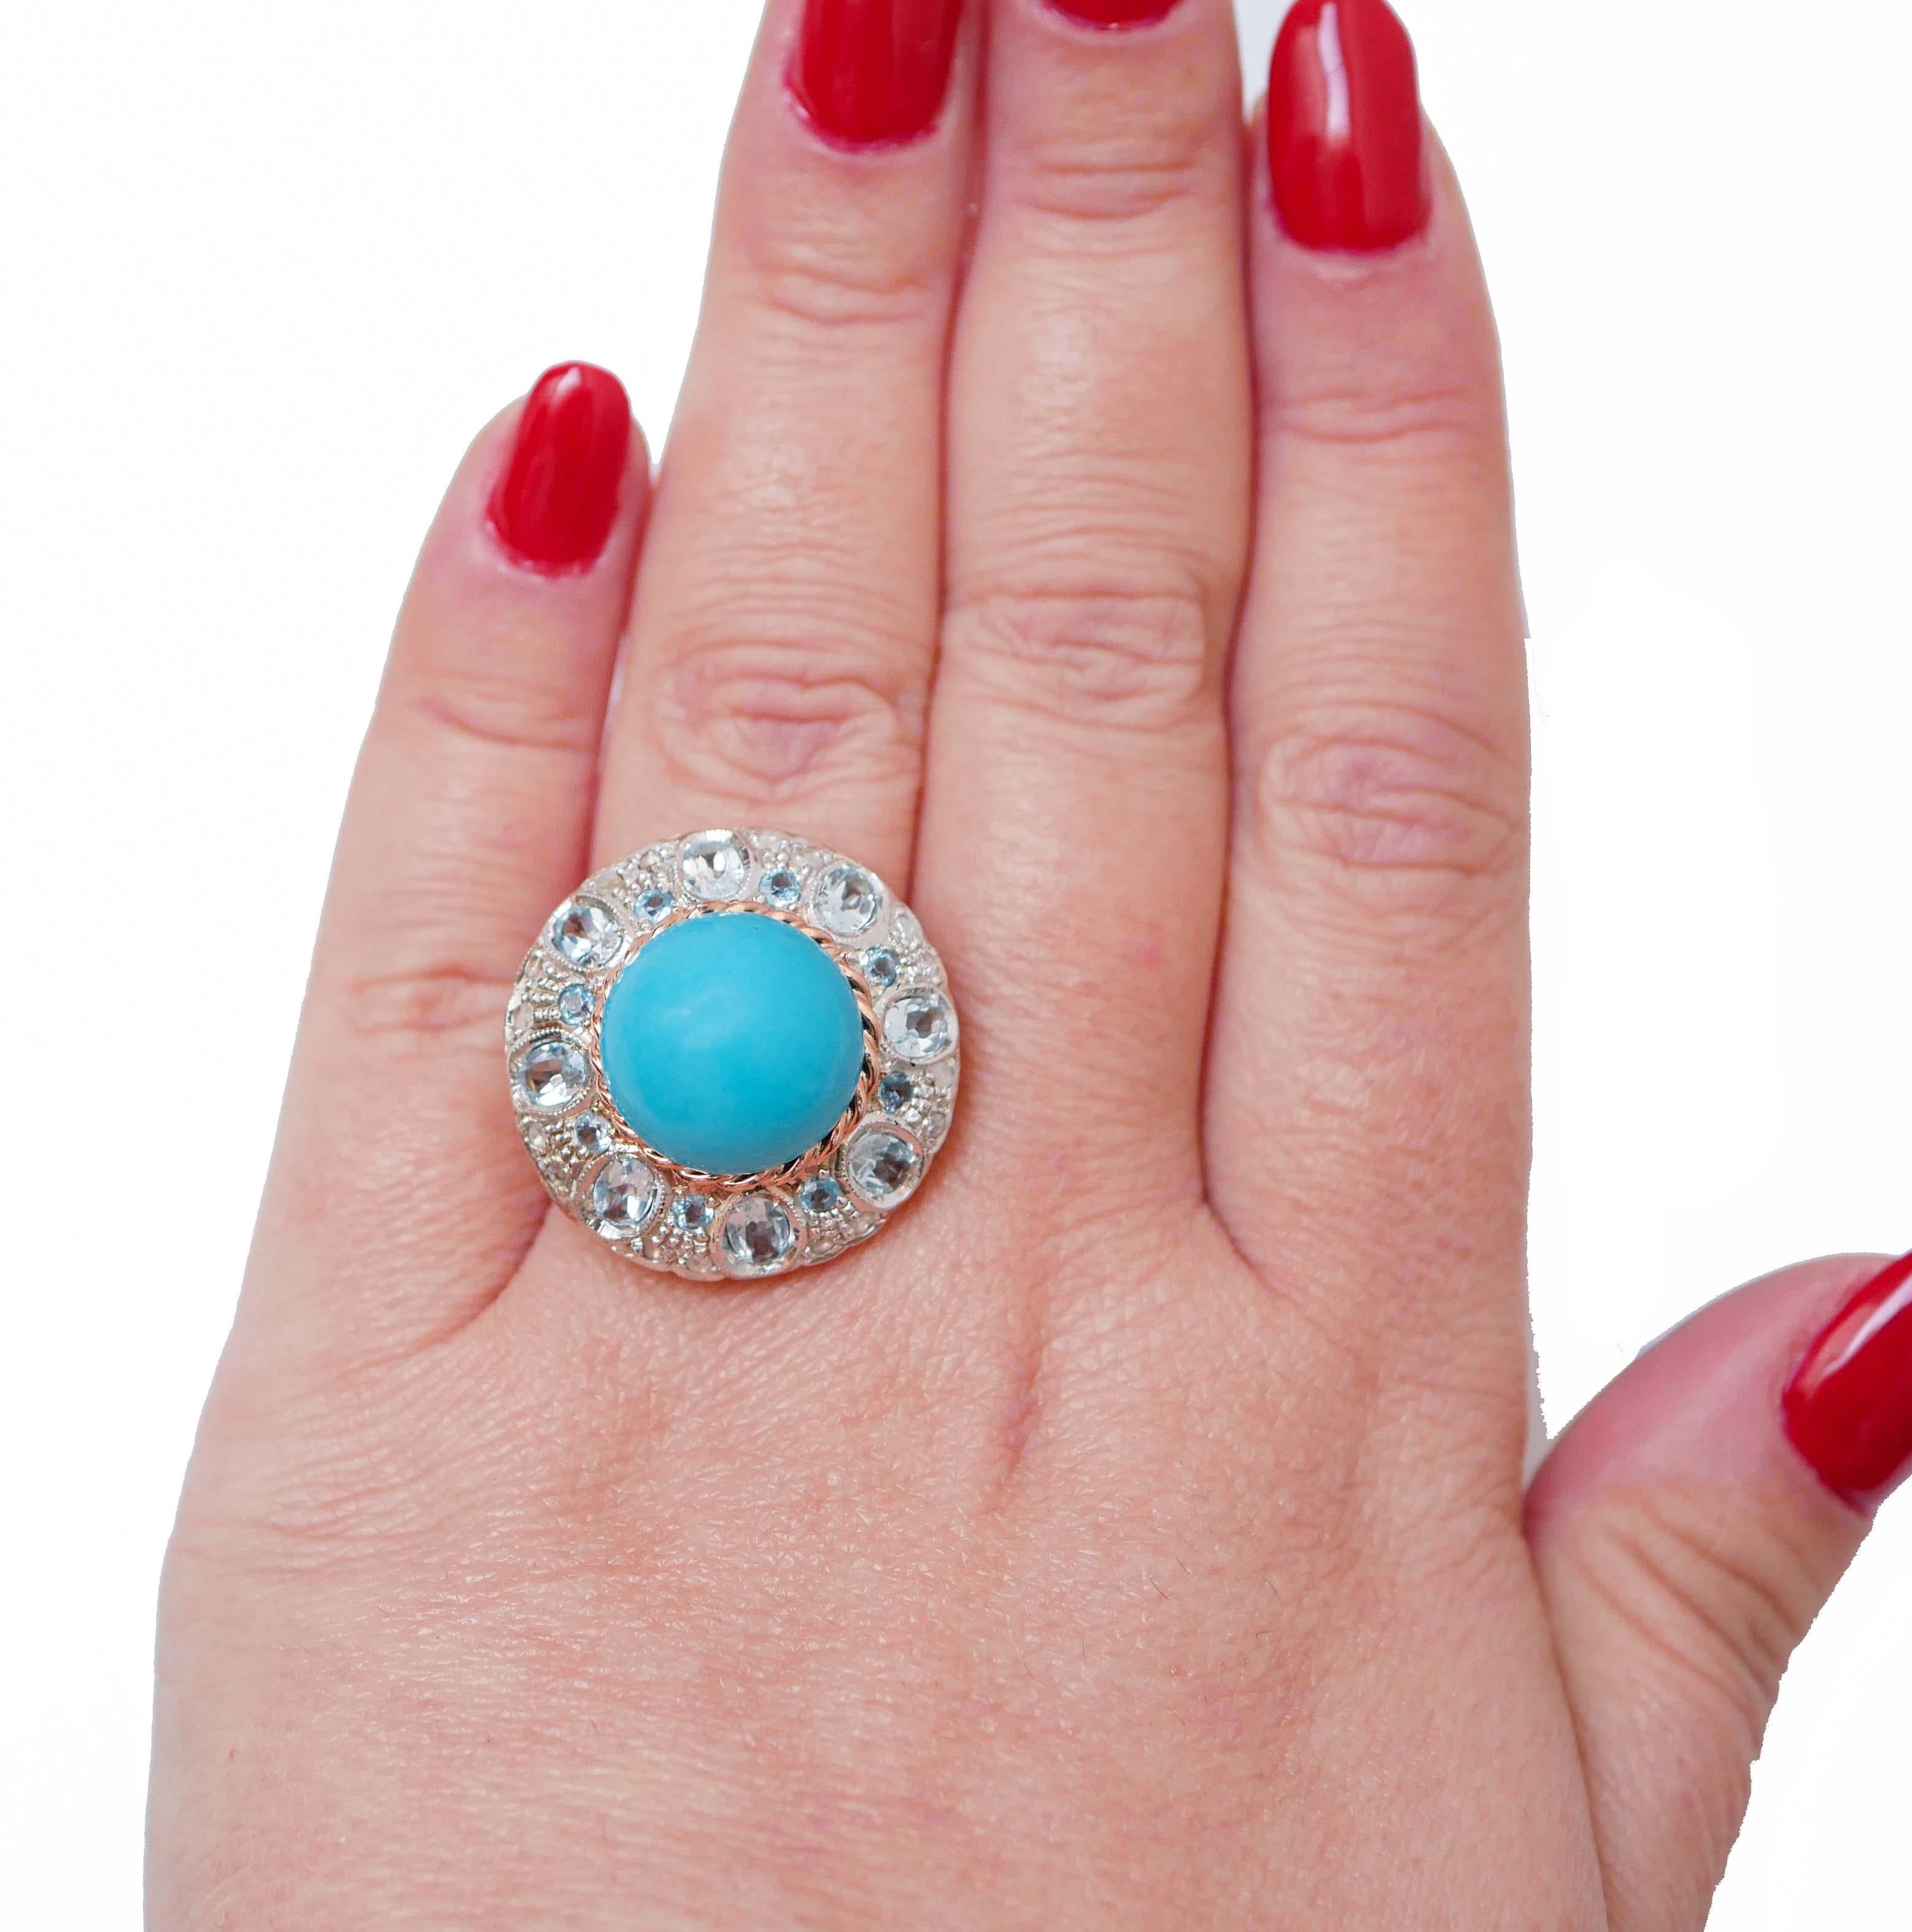 Mixed Cut Magnesite, Aquamarine Color Topazs, Diamonds, Rose Gold and Silver Ring. For Sale